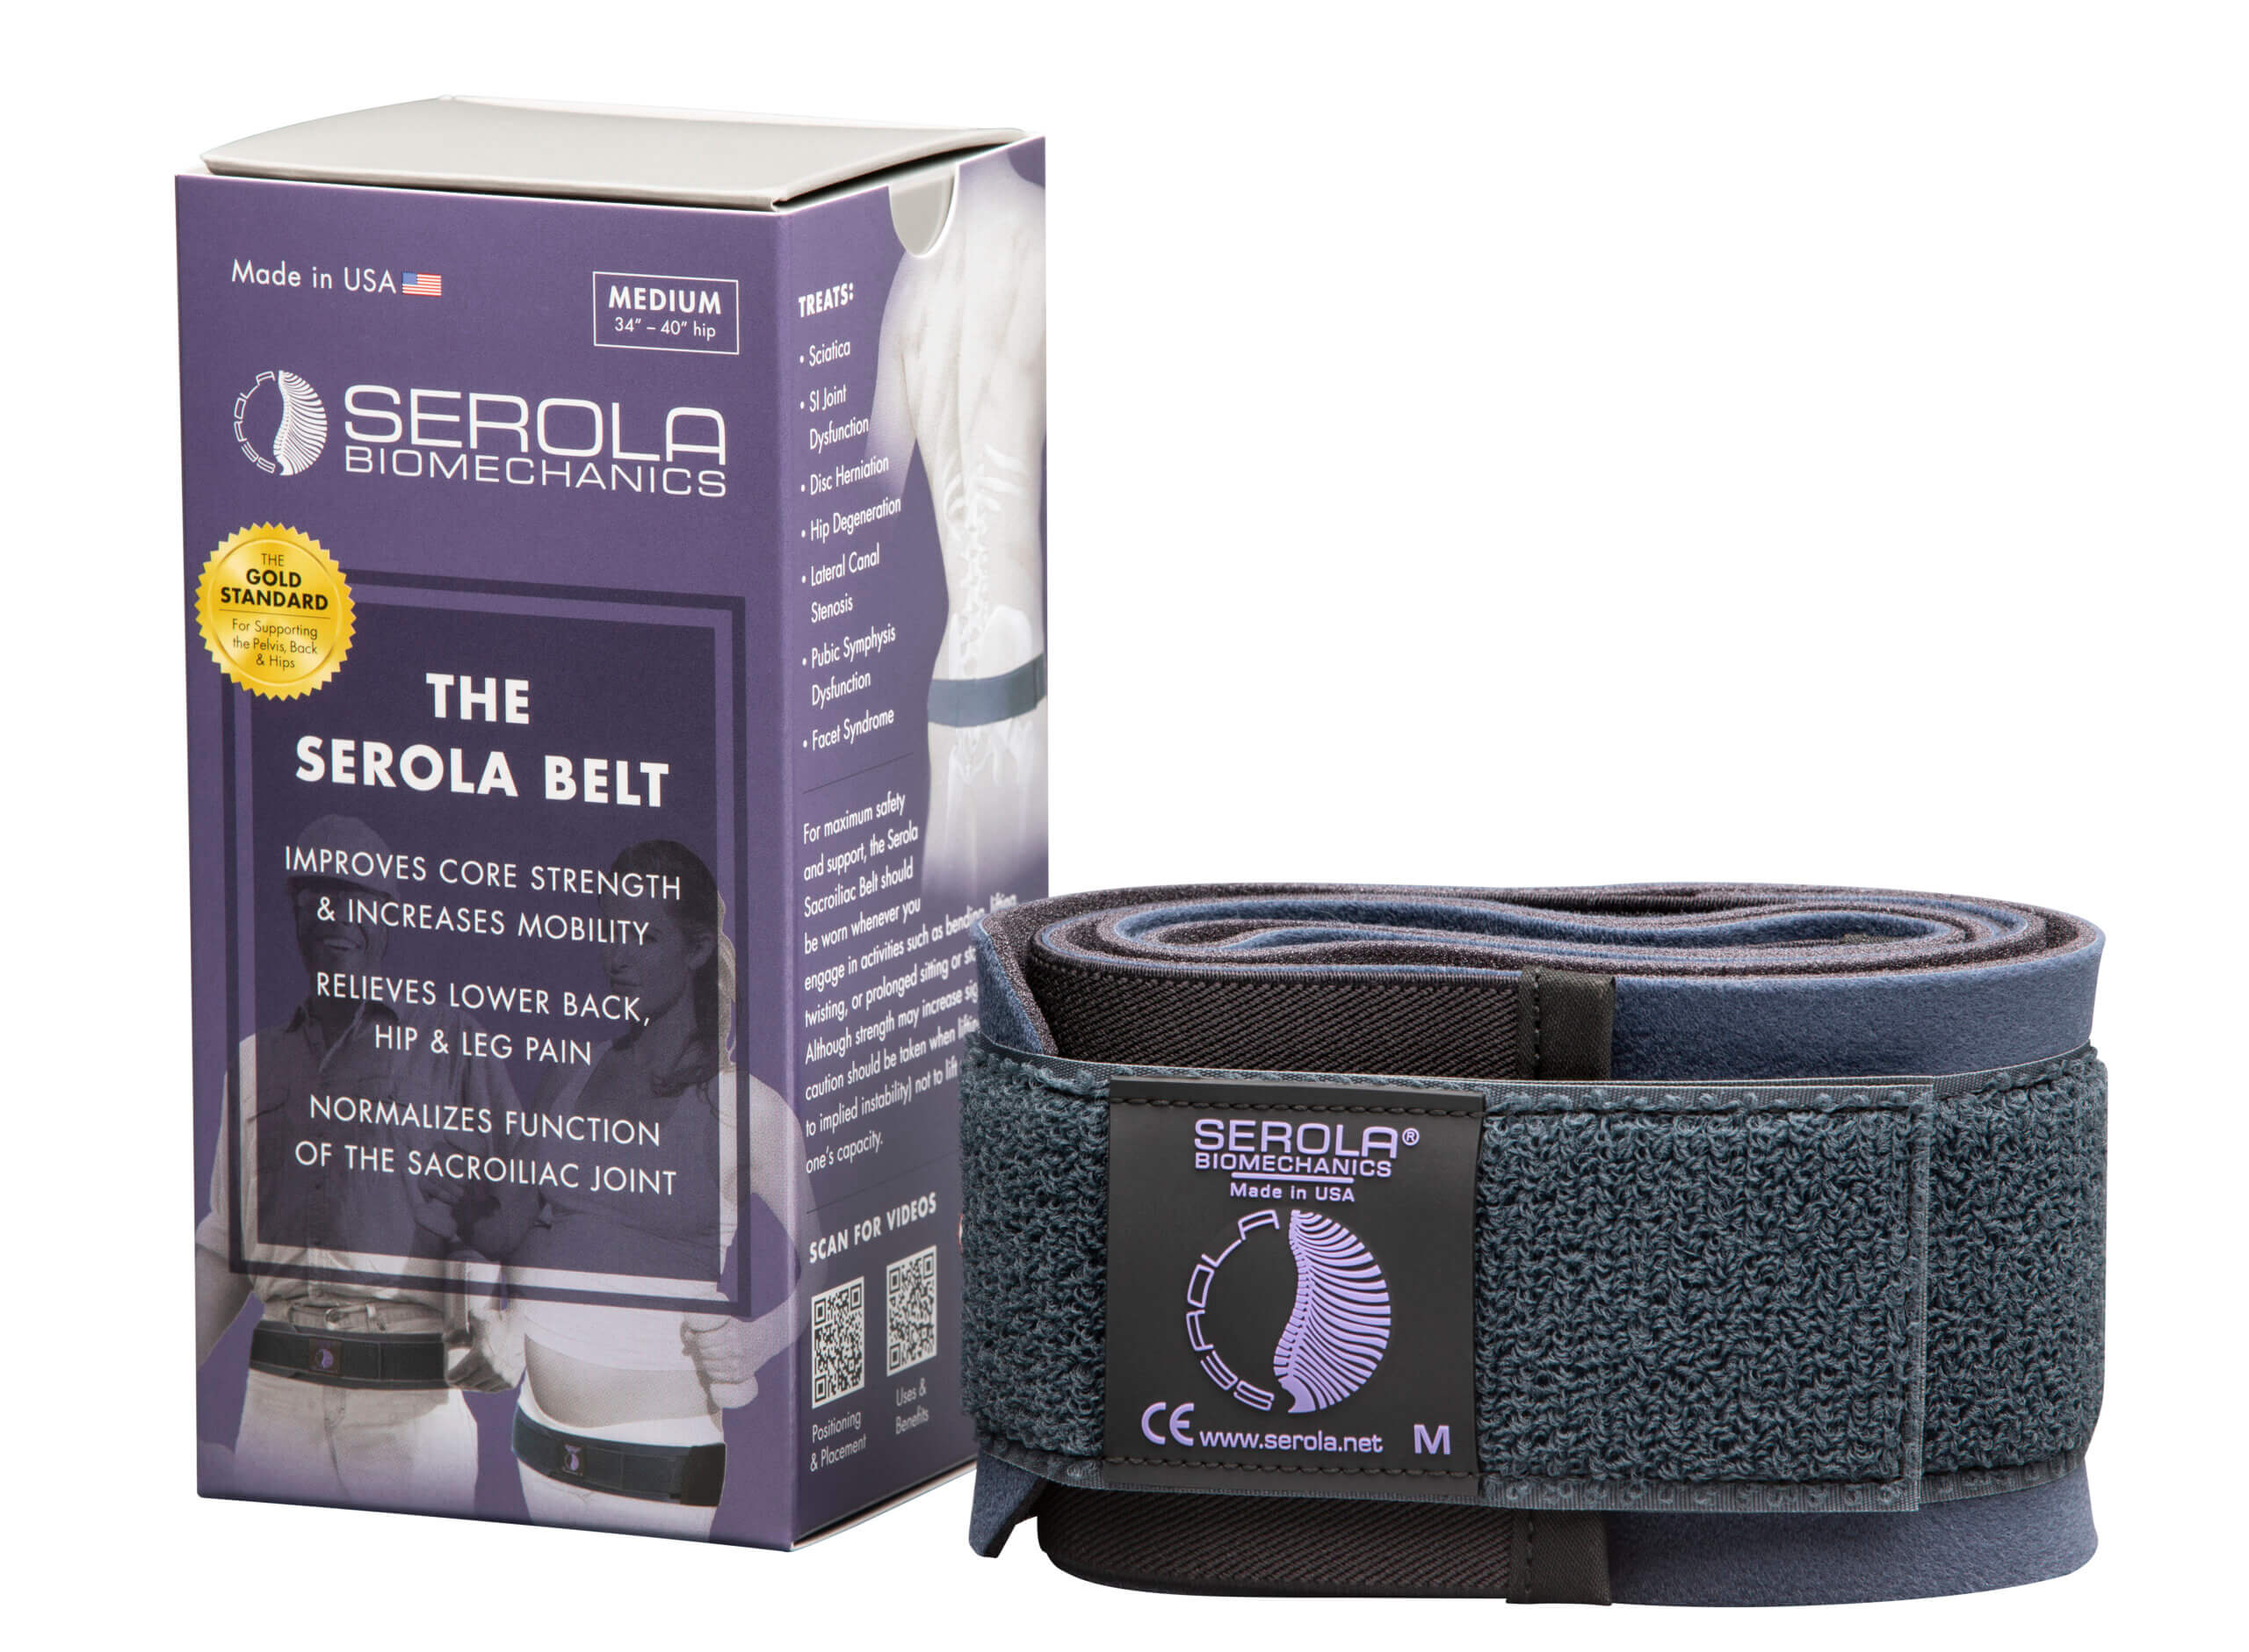 DR-HO'S 2-in-1 Back Relief Stretch & Support Belt - Wellwise by